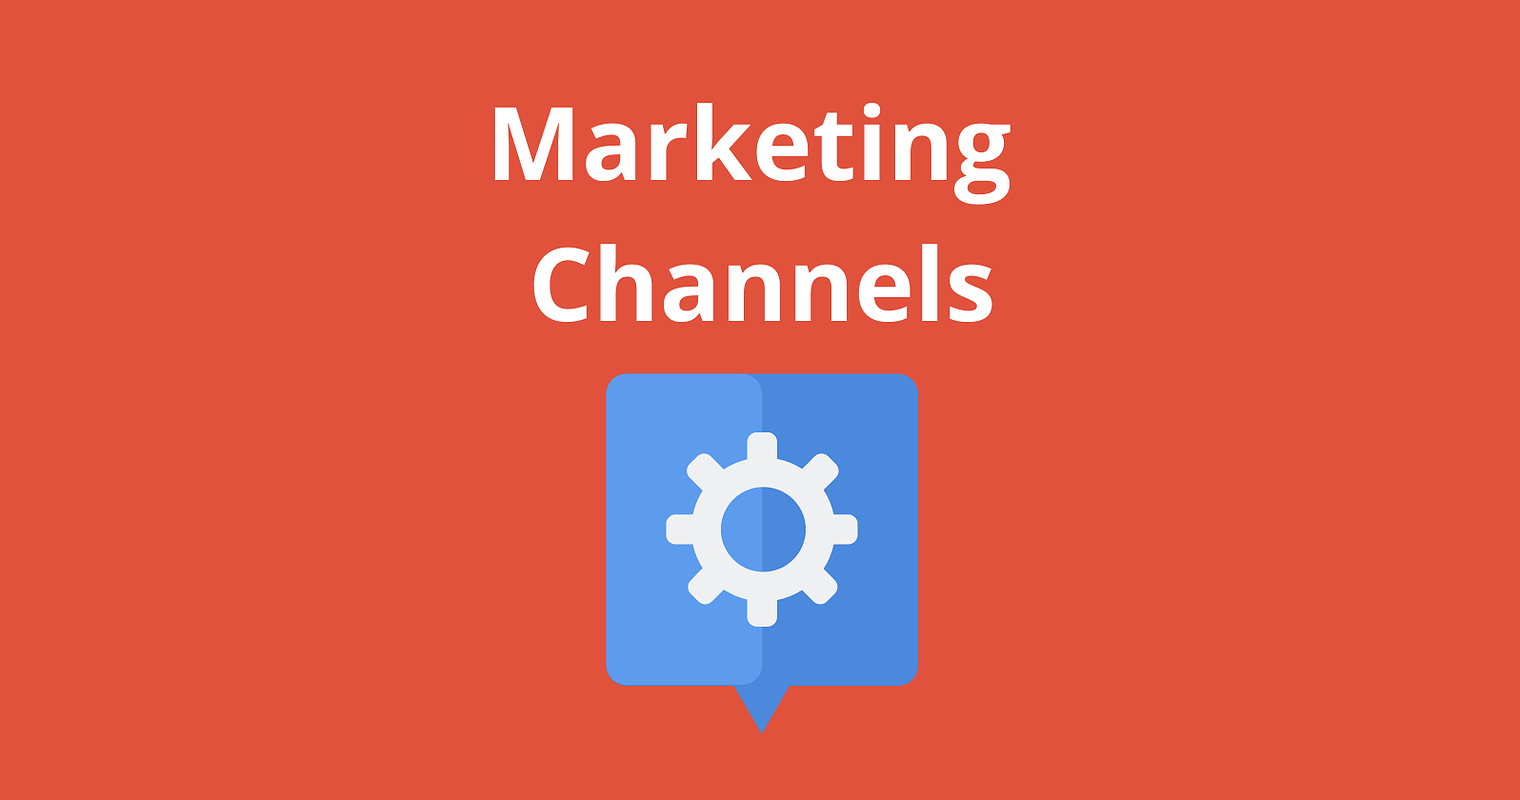 The Right Marketing Channel Allows You to Pivot Quickly